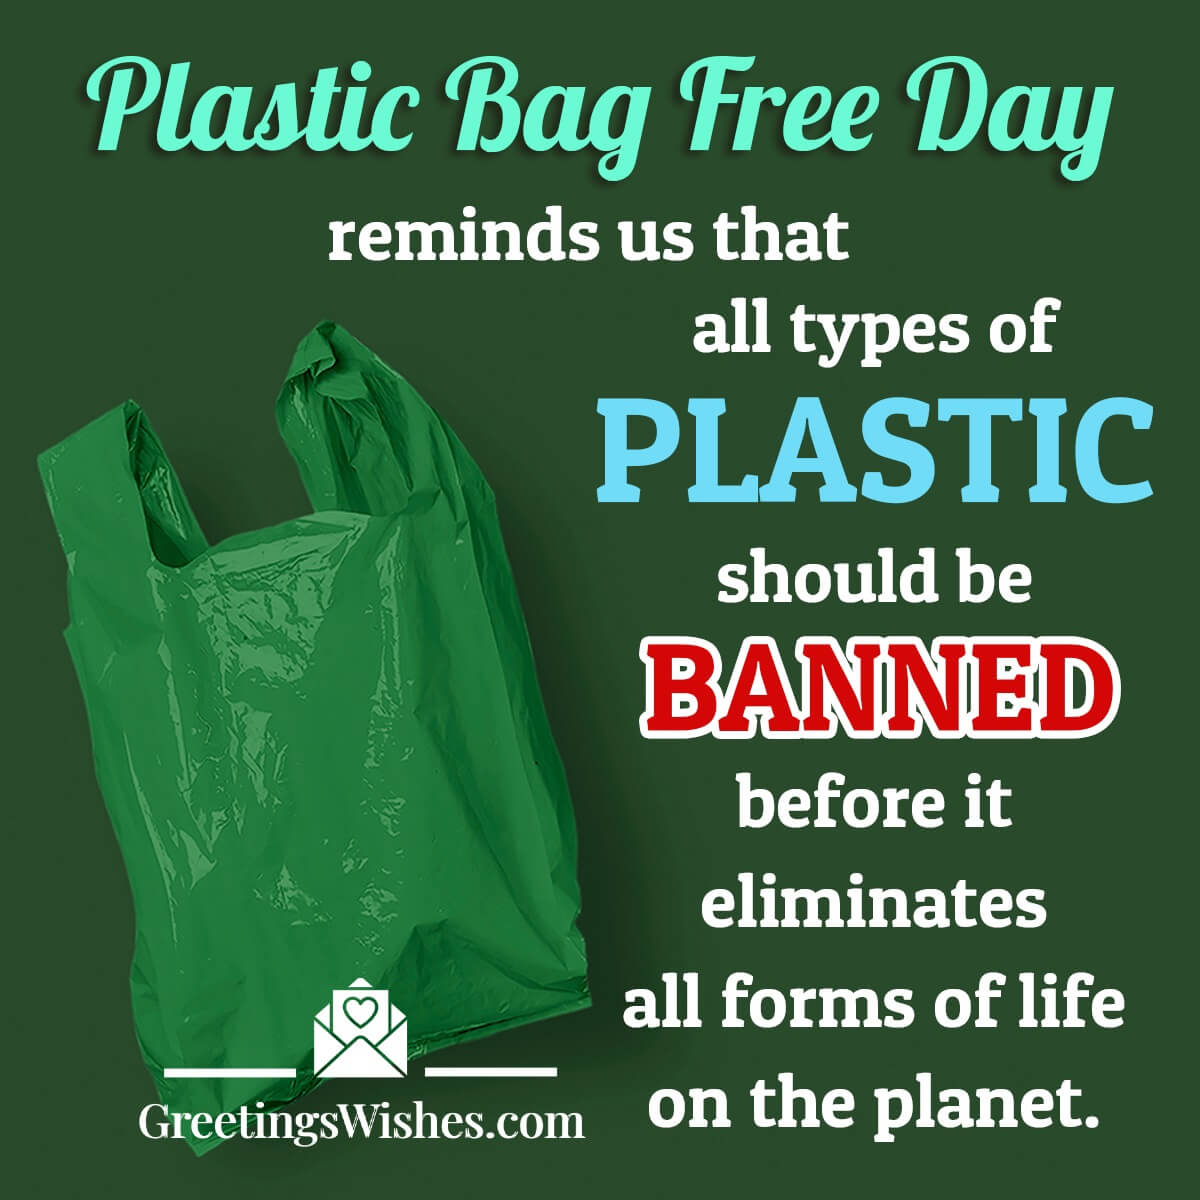 International Plastic Bag Free Day Wishes (3rd July) - Greetings Wishes